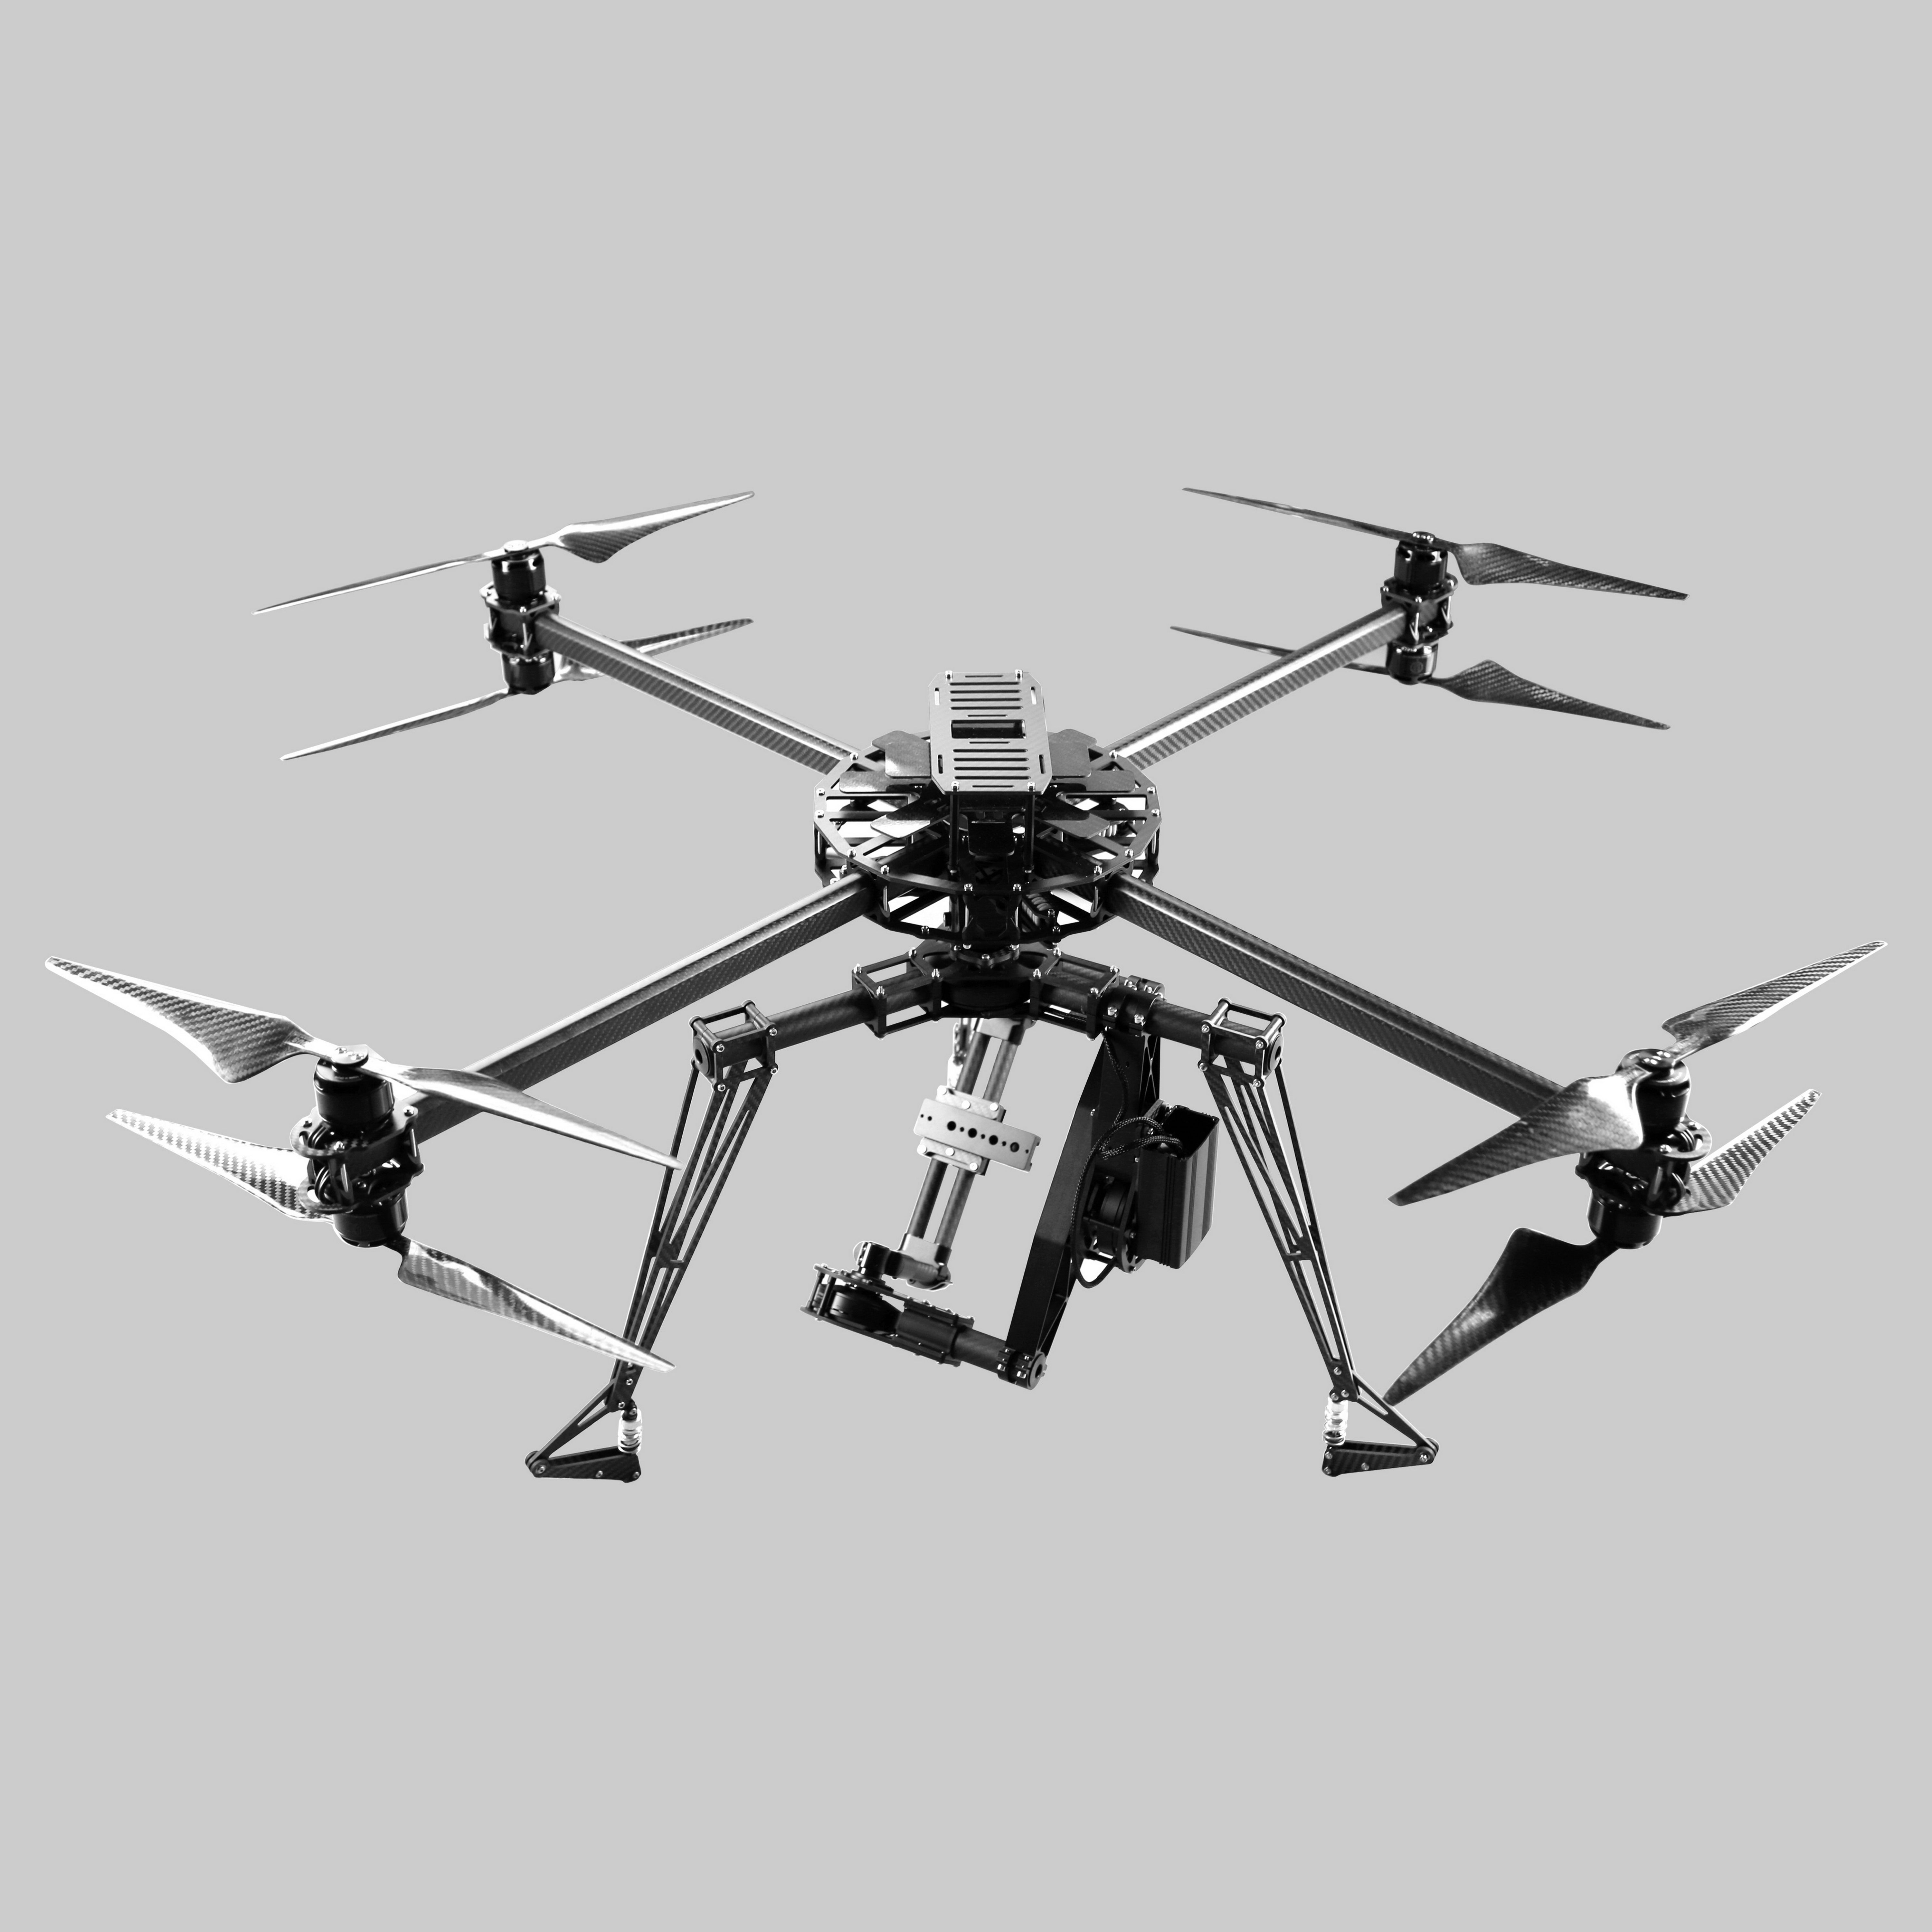 X8 Quad Multirotor Frame Drone Kit for Heavy Lift with rectangular booms